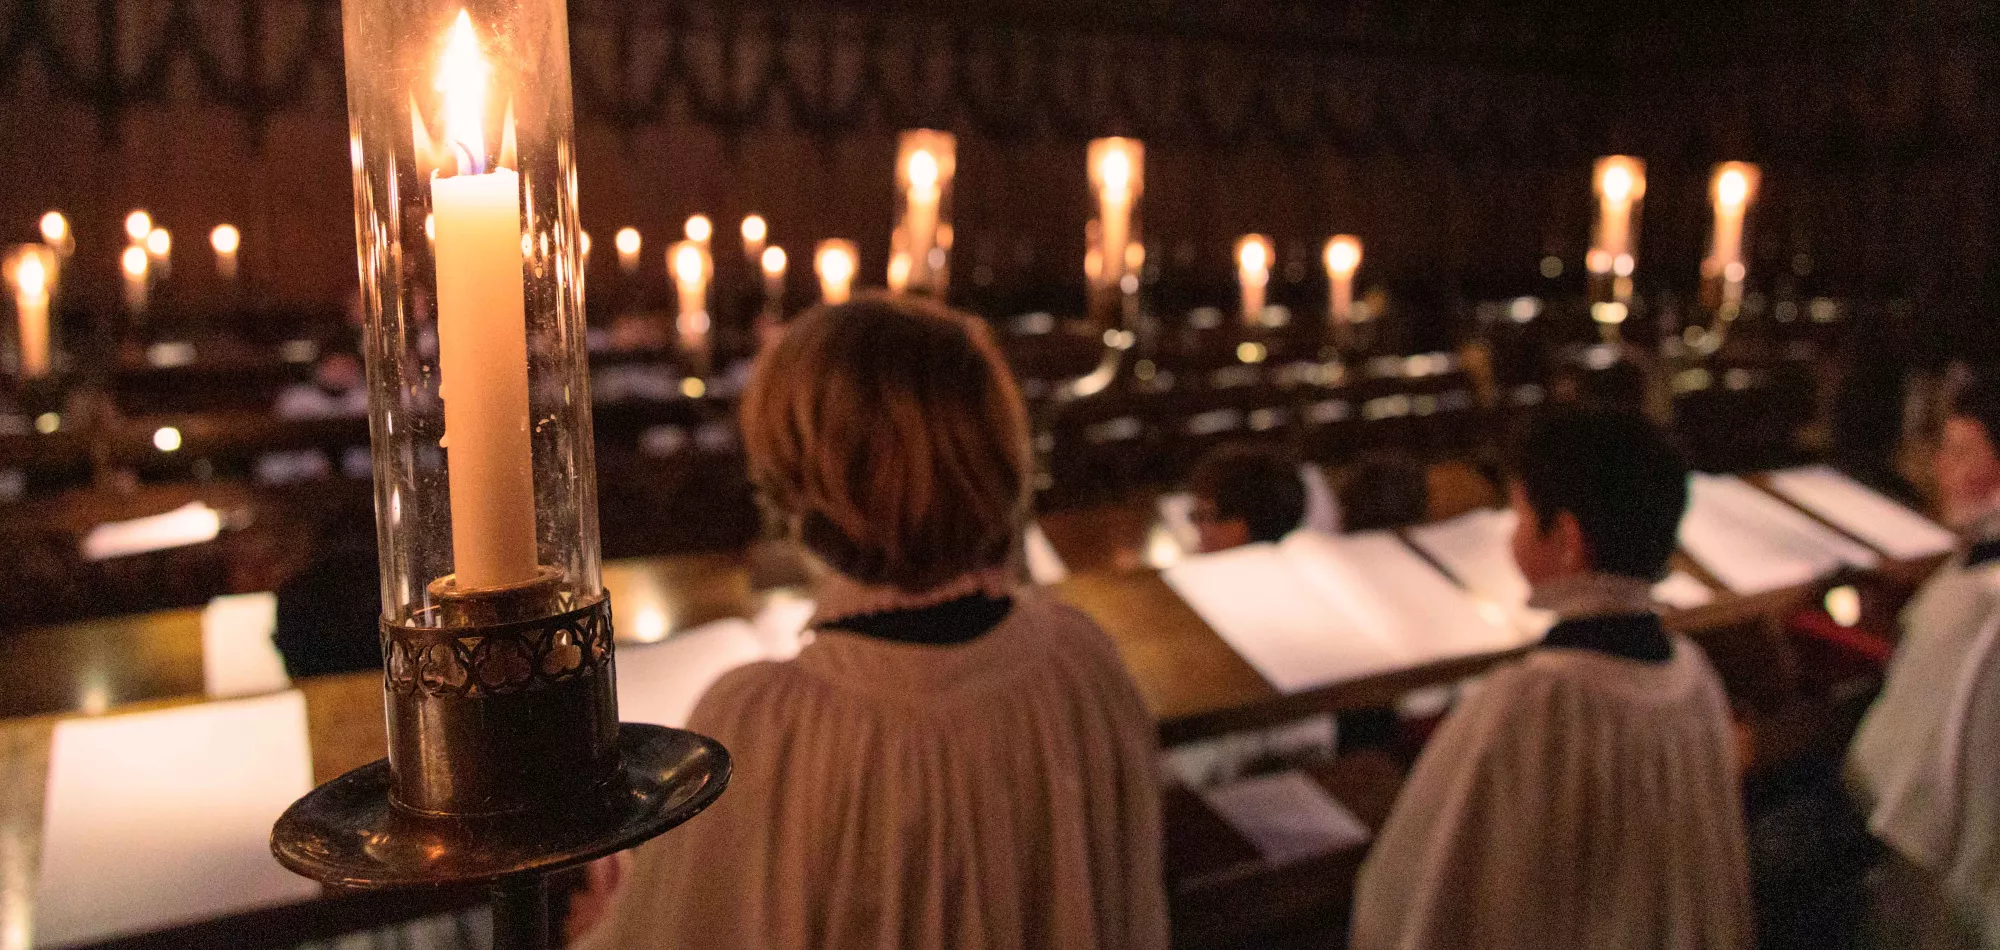 Candles and choristers in chapel